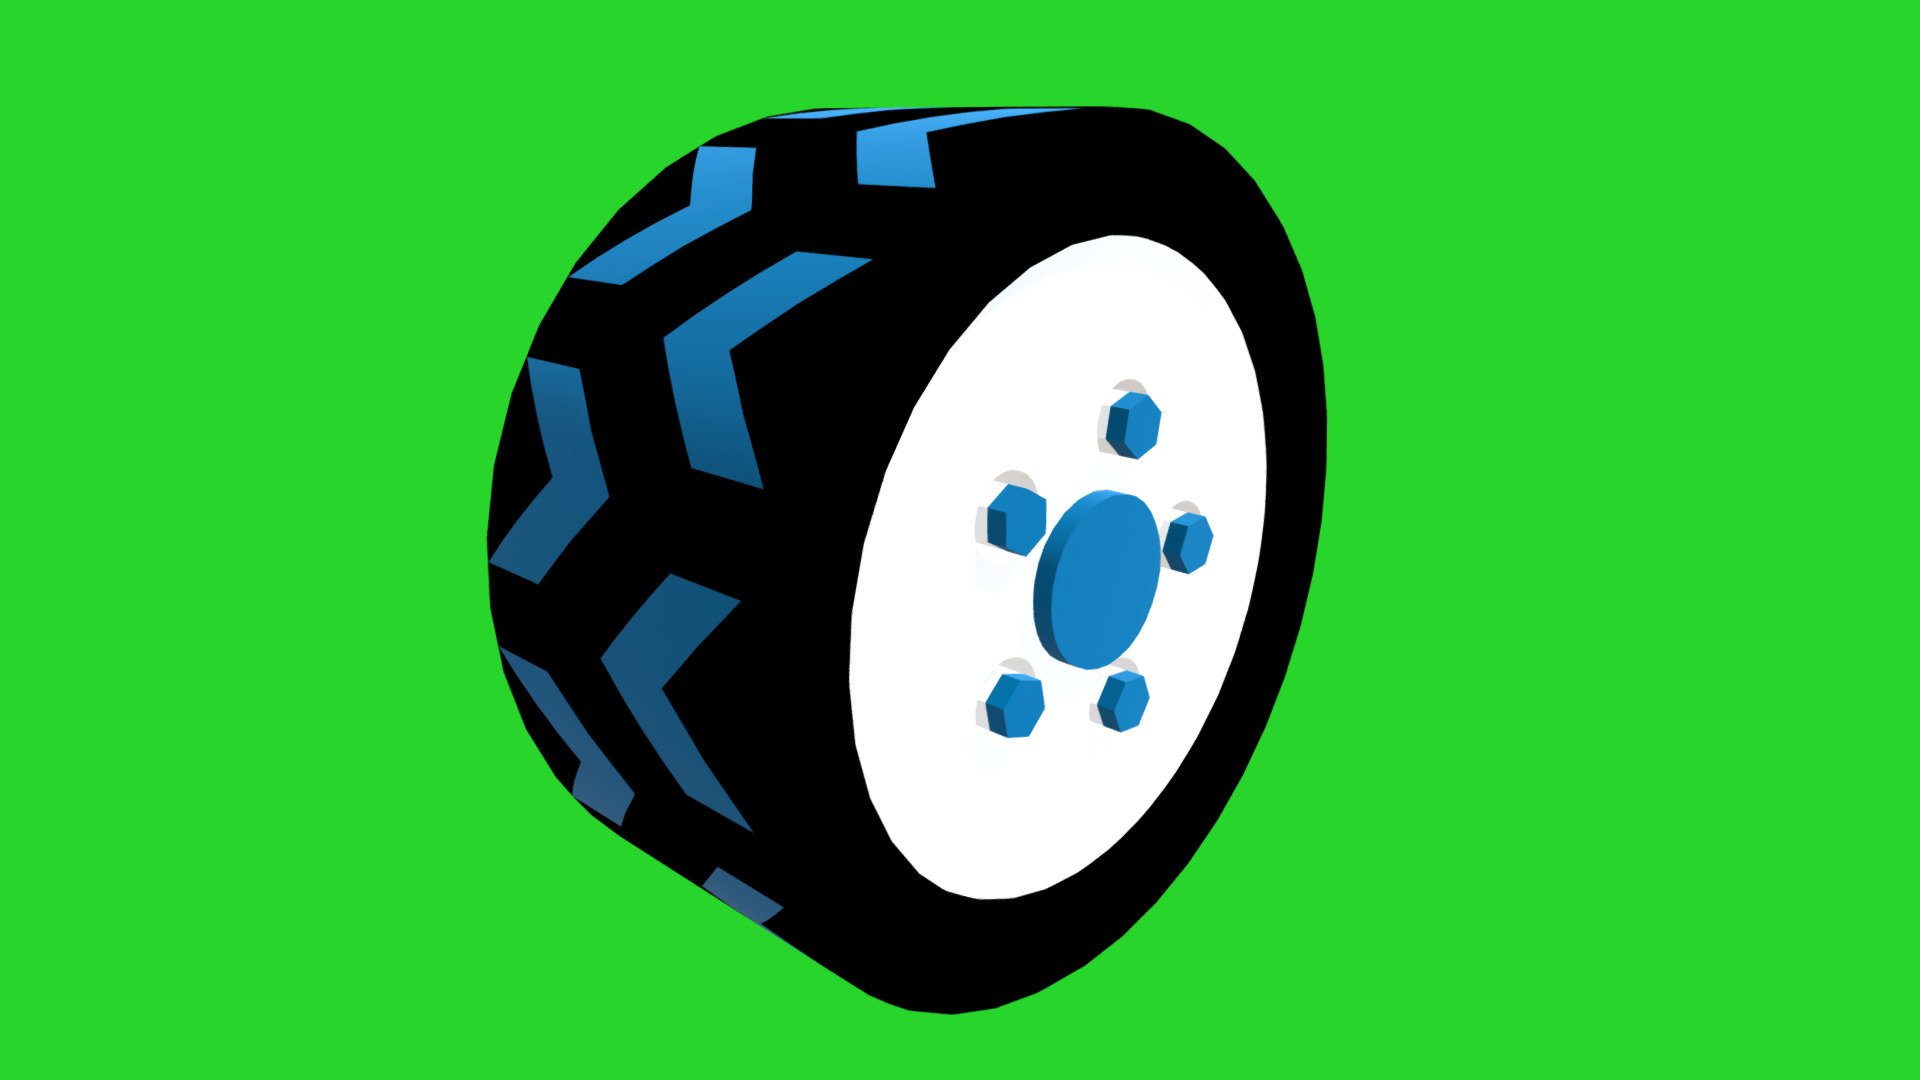 Vehicle Wheel and Tire. A unique tread pattern on interchangeable tire and rim set. All our riims have a double-sided design with wheel nuts for show only. This means that the wheel loads at the center of gravity. All wheels, brakes, rims, tires and hub caps are interchangeable, are fully editable and can easily be re-proportioned in their x,y and z directions tto give a different look.  The wheels are not rñight or left handed and can be mounted on both sides of tthe vehicle. In order  to animate or mount on a free-spinning bearing, please refer to our blog at https://cad-boxx.com - generic-wheel-and-tire - 3D model by fasteng 3d model